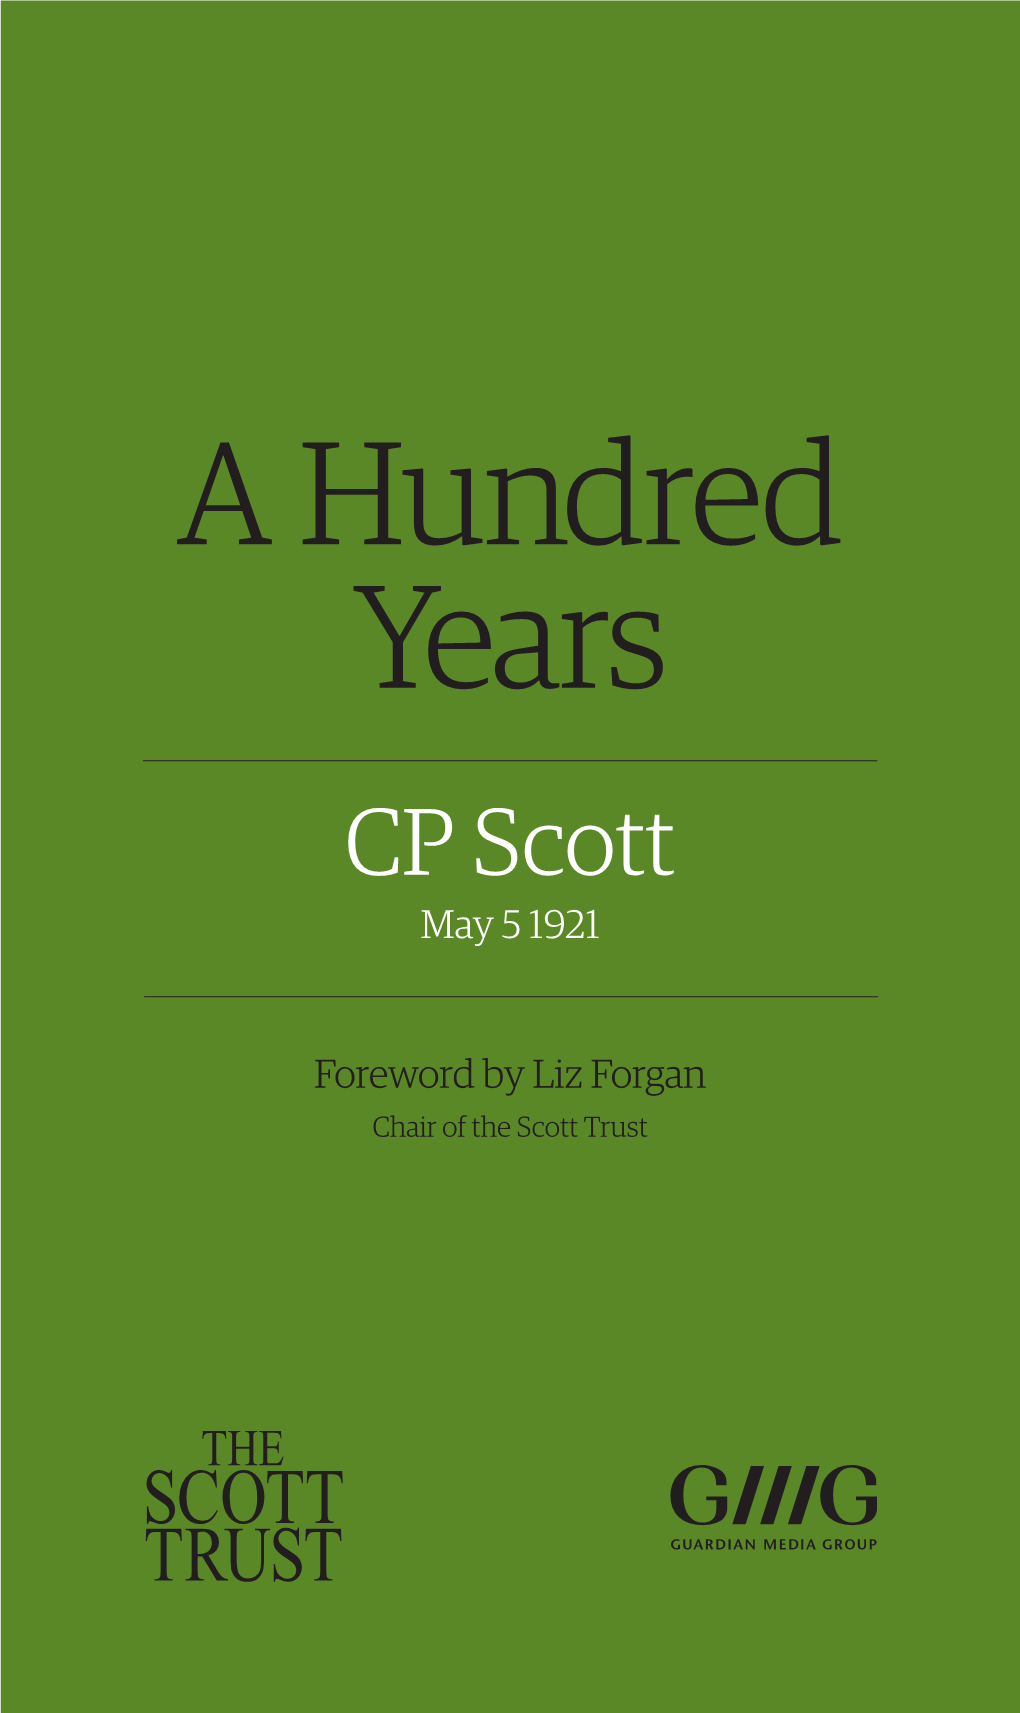 A Hundred Years CP Scott May 5 1921